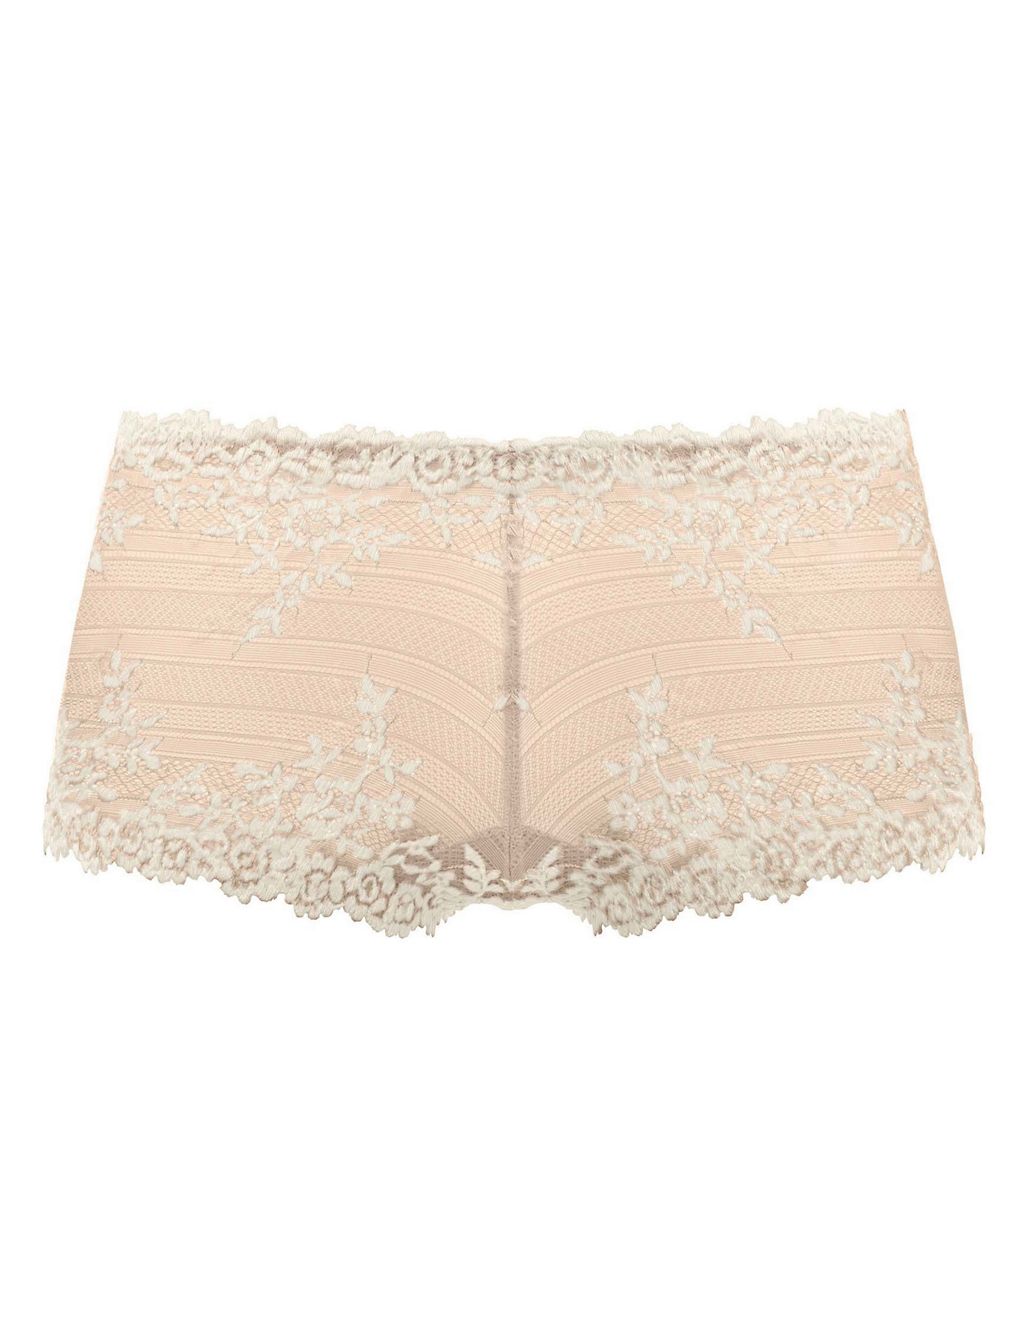 Embrace Lace Low Rise Knicker Shorts 1 of 5